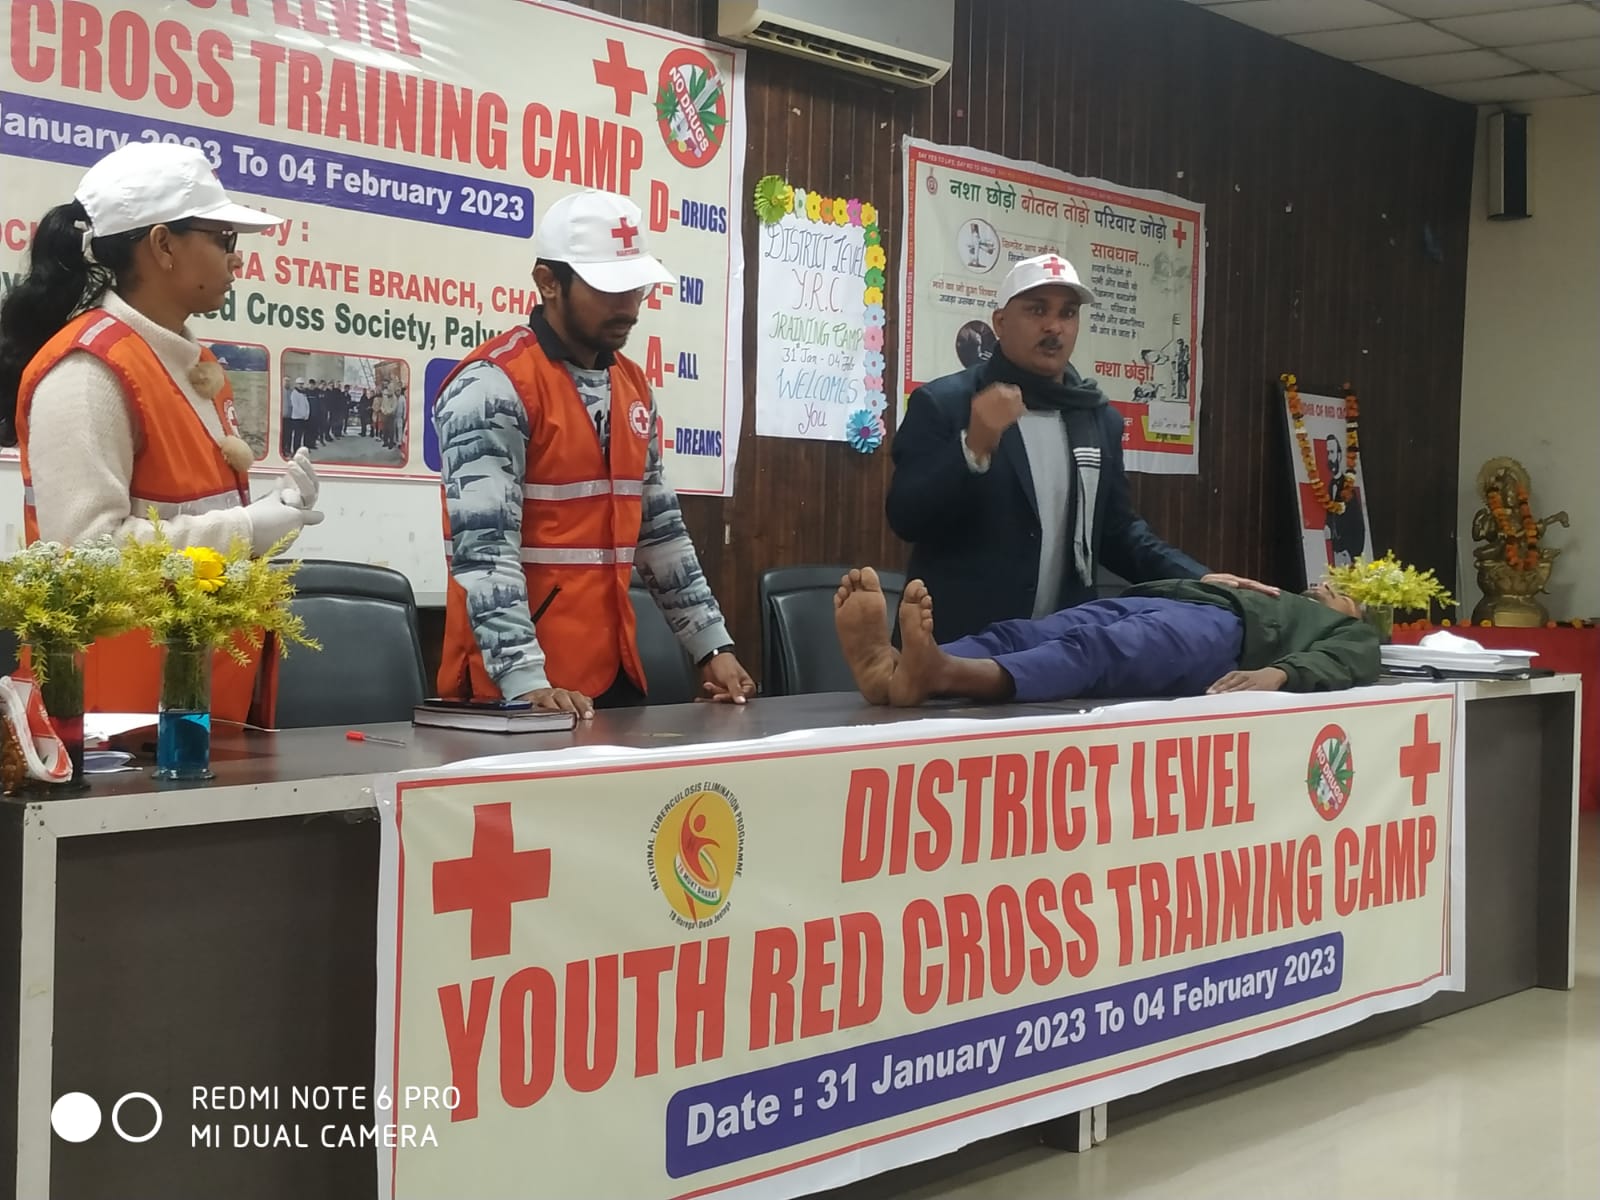 Five Day District Level YRC Traning Camp